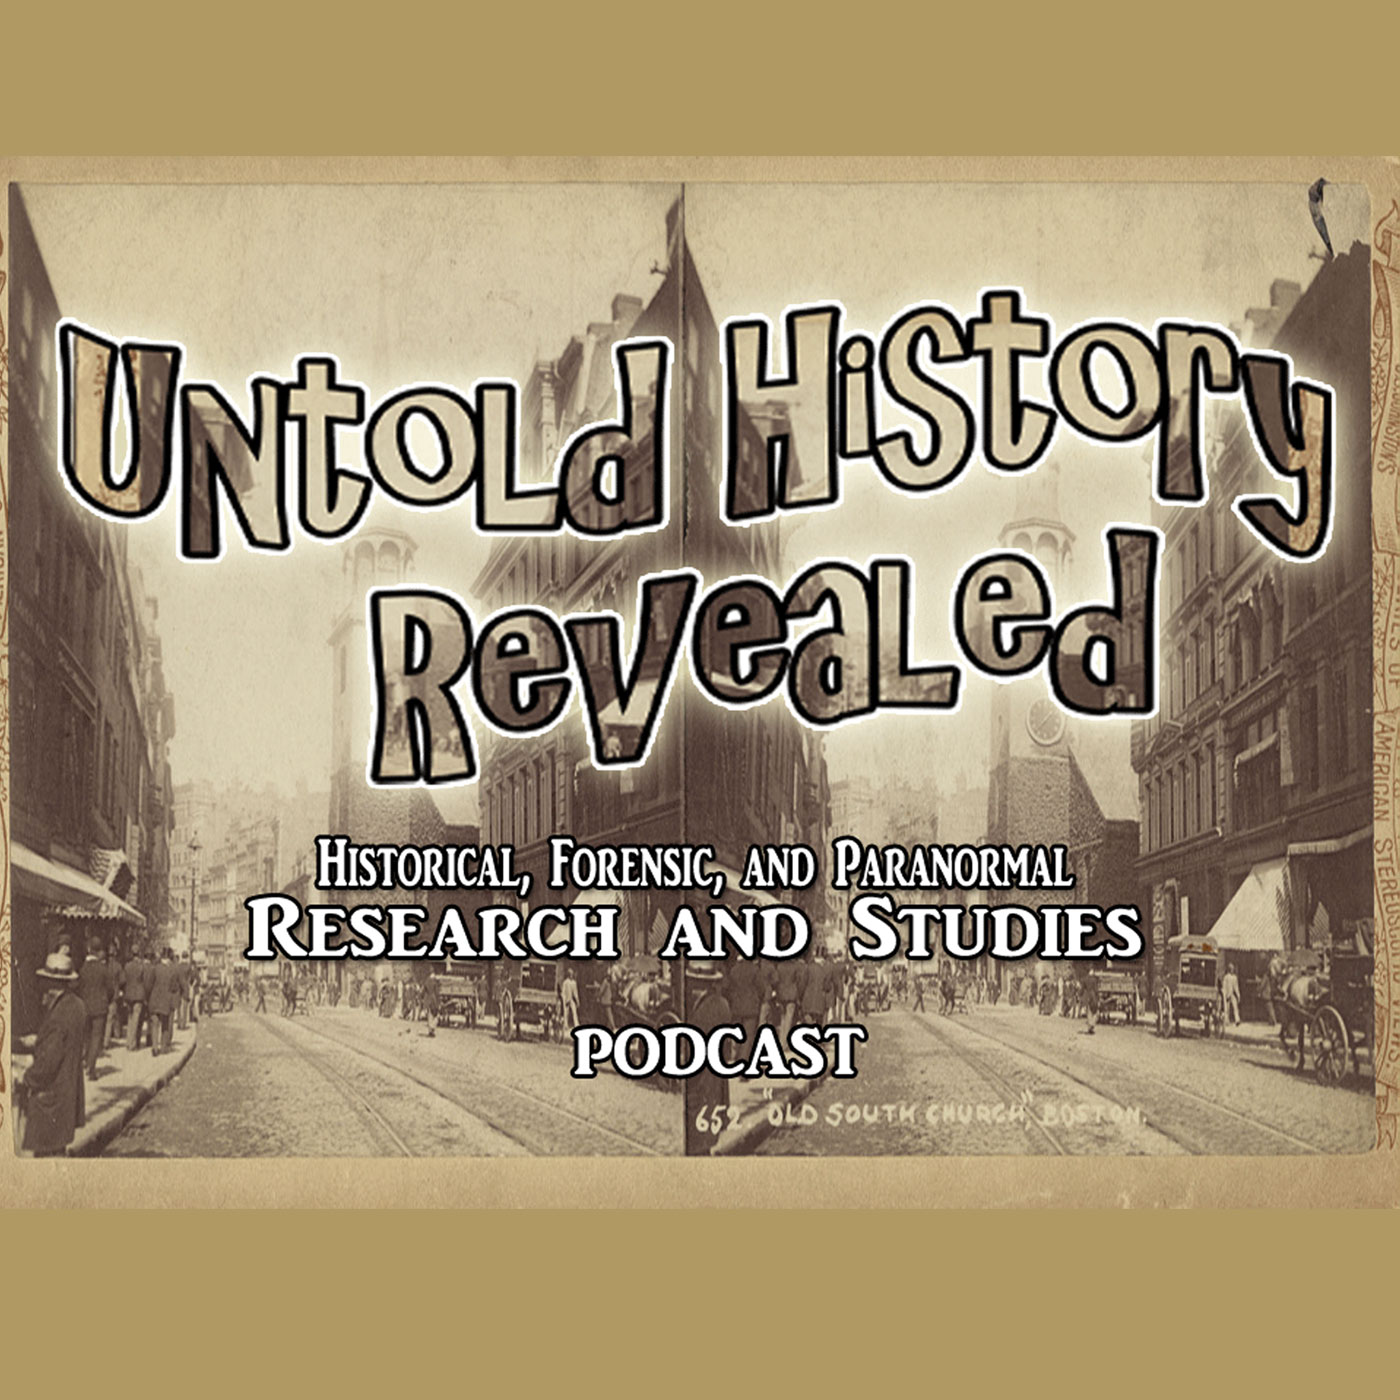 S2E13 - 1893 Columbian Exposition - Details - Untold History Revealed